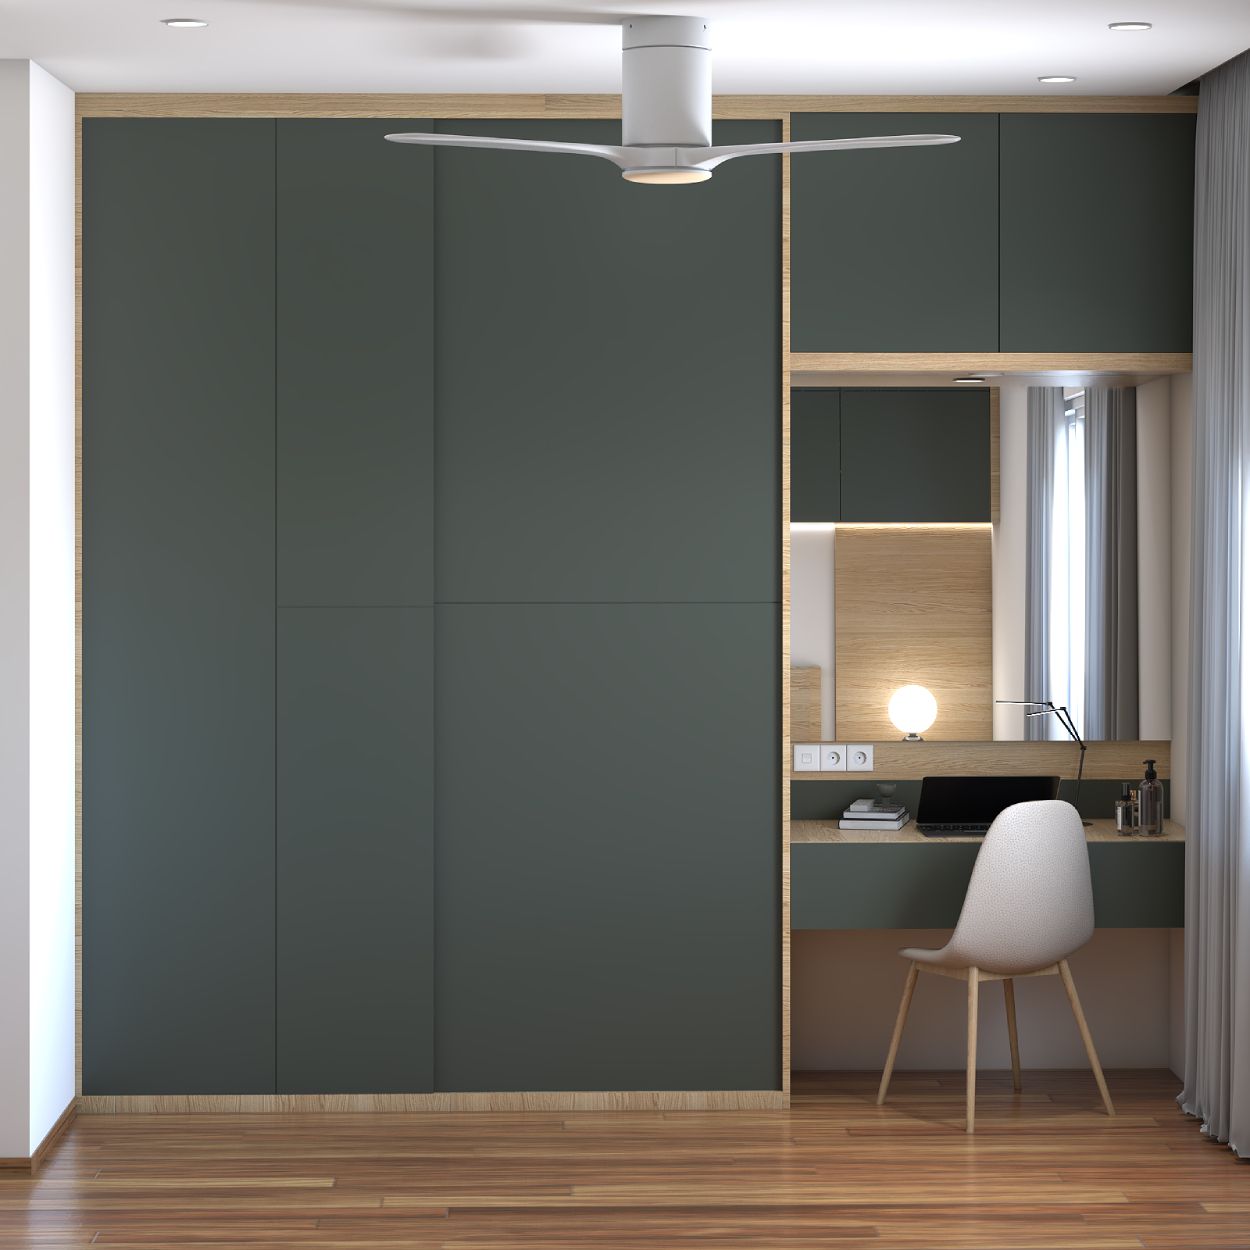 Contemporary Autumn Leaf And Wood 2-Door Sliding Wardrobe Design With Study Unit